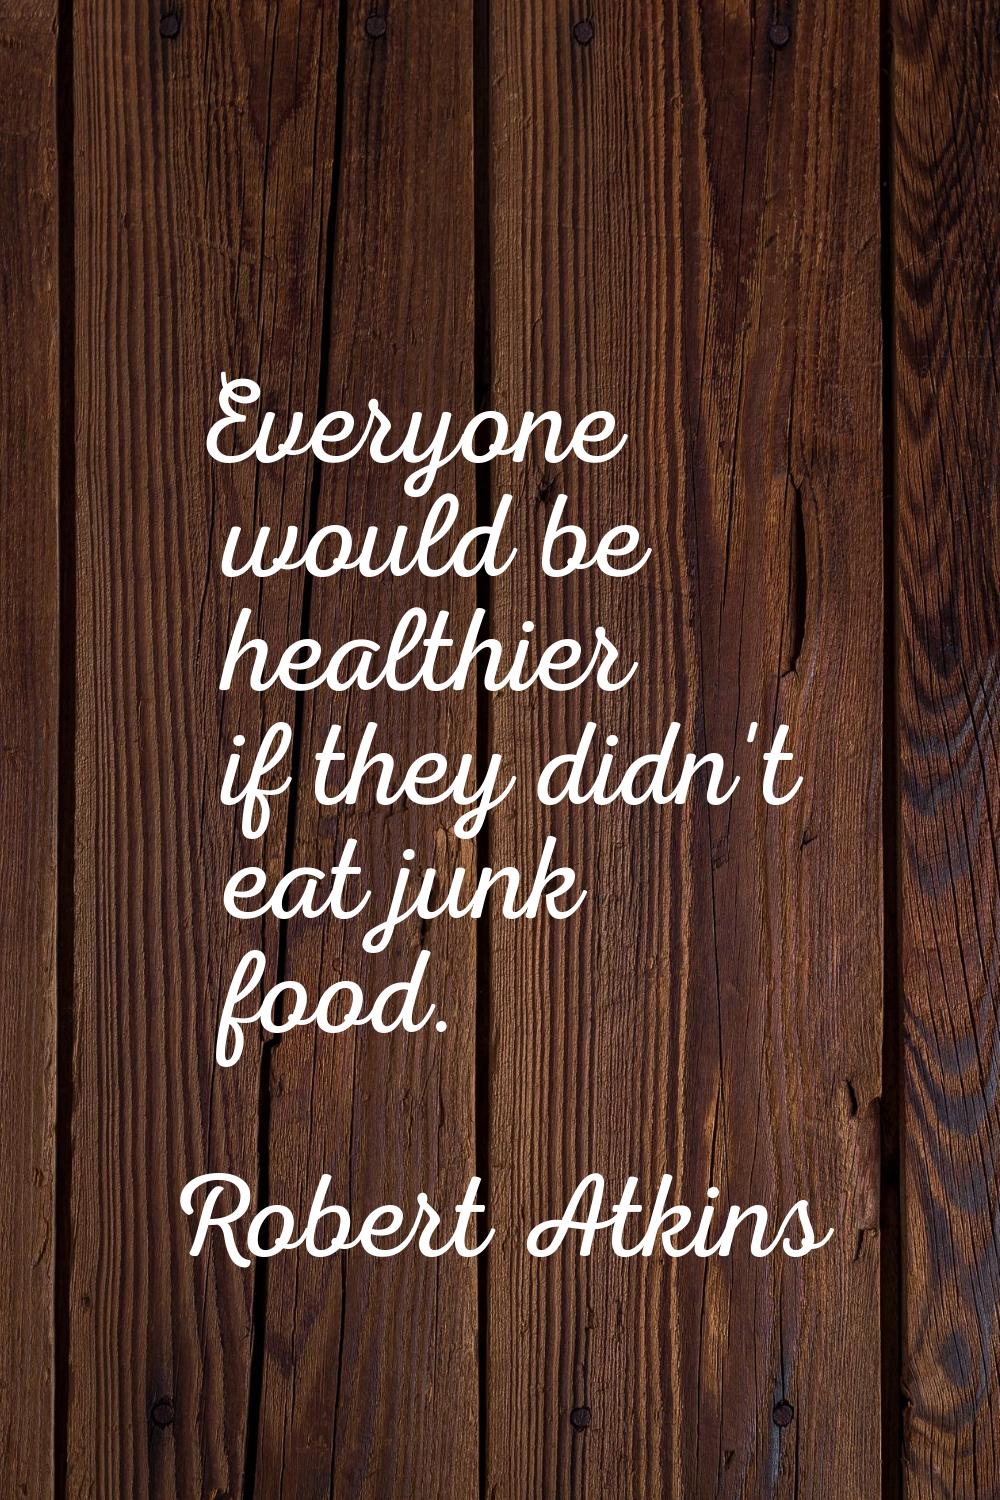 Everyone would be healthier if they didn't eat junk food.